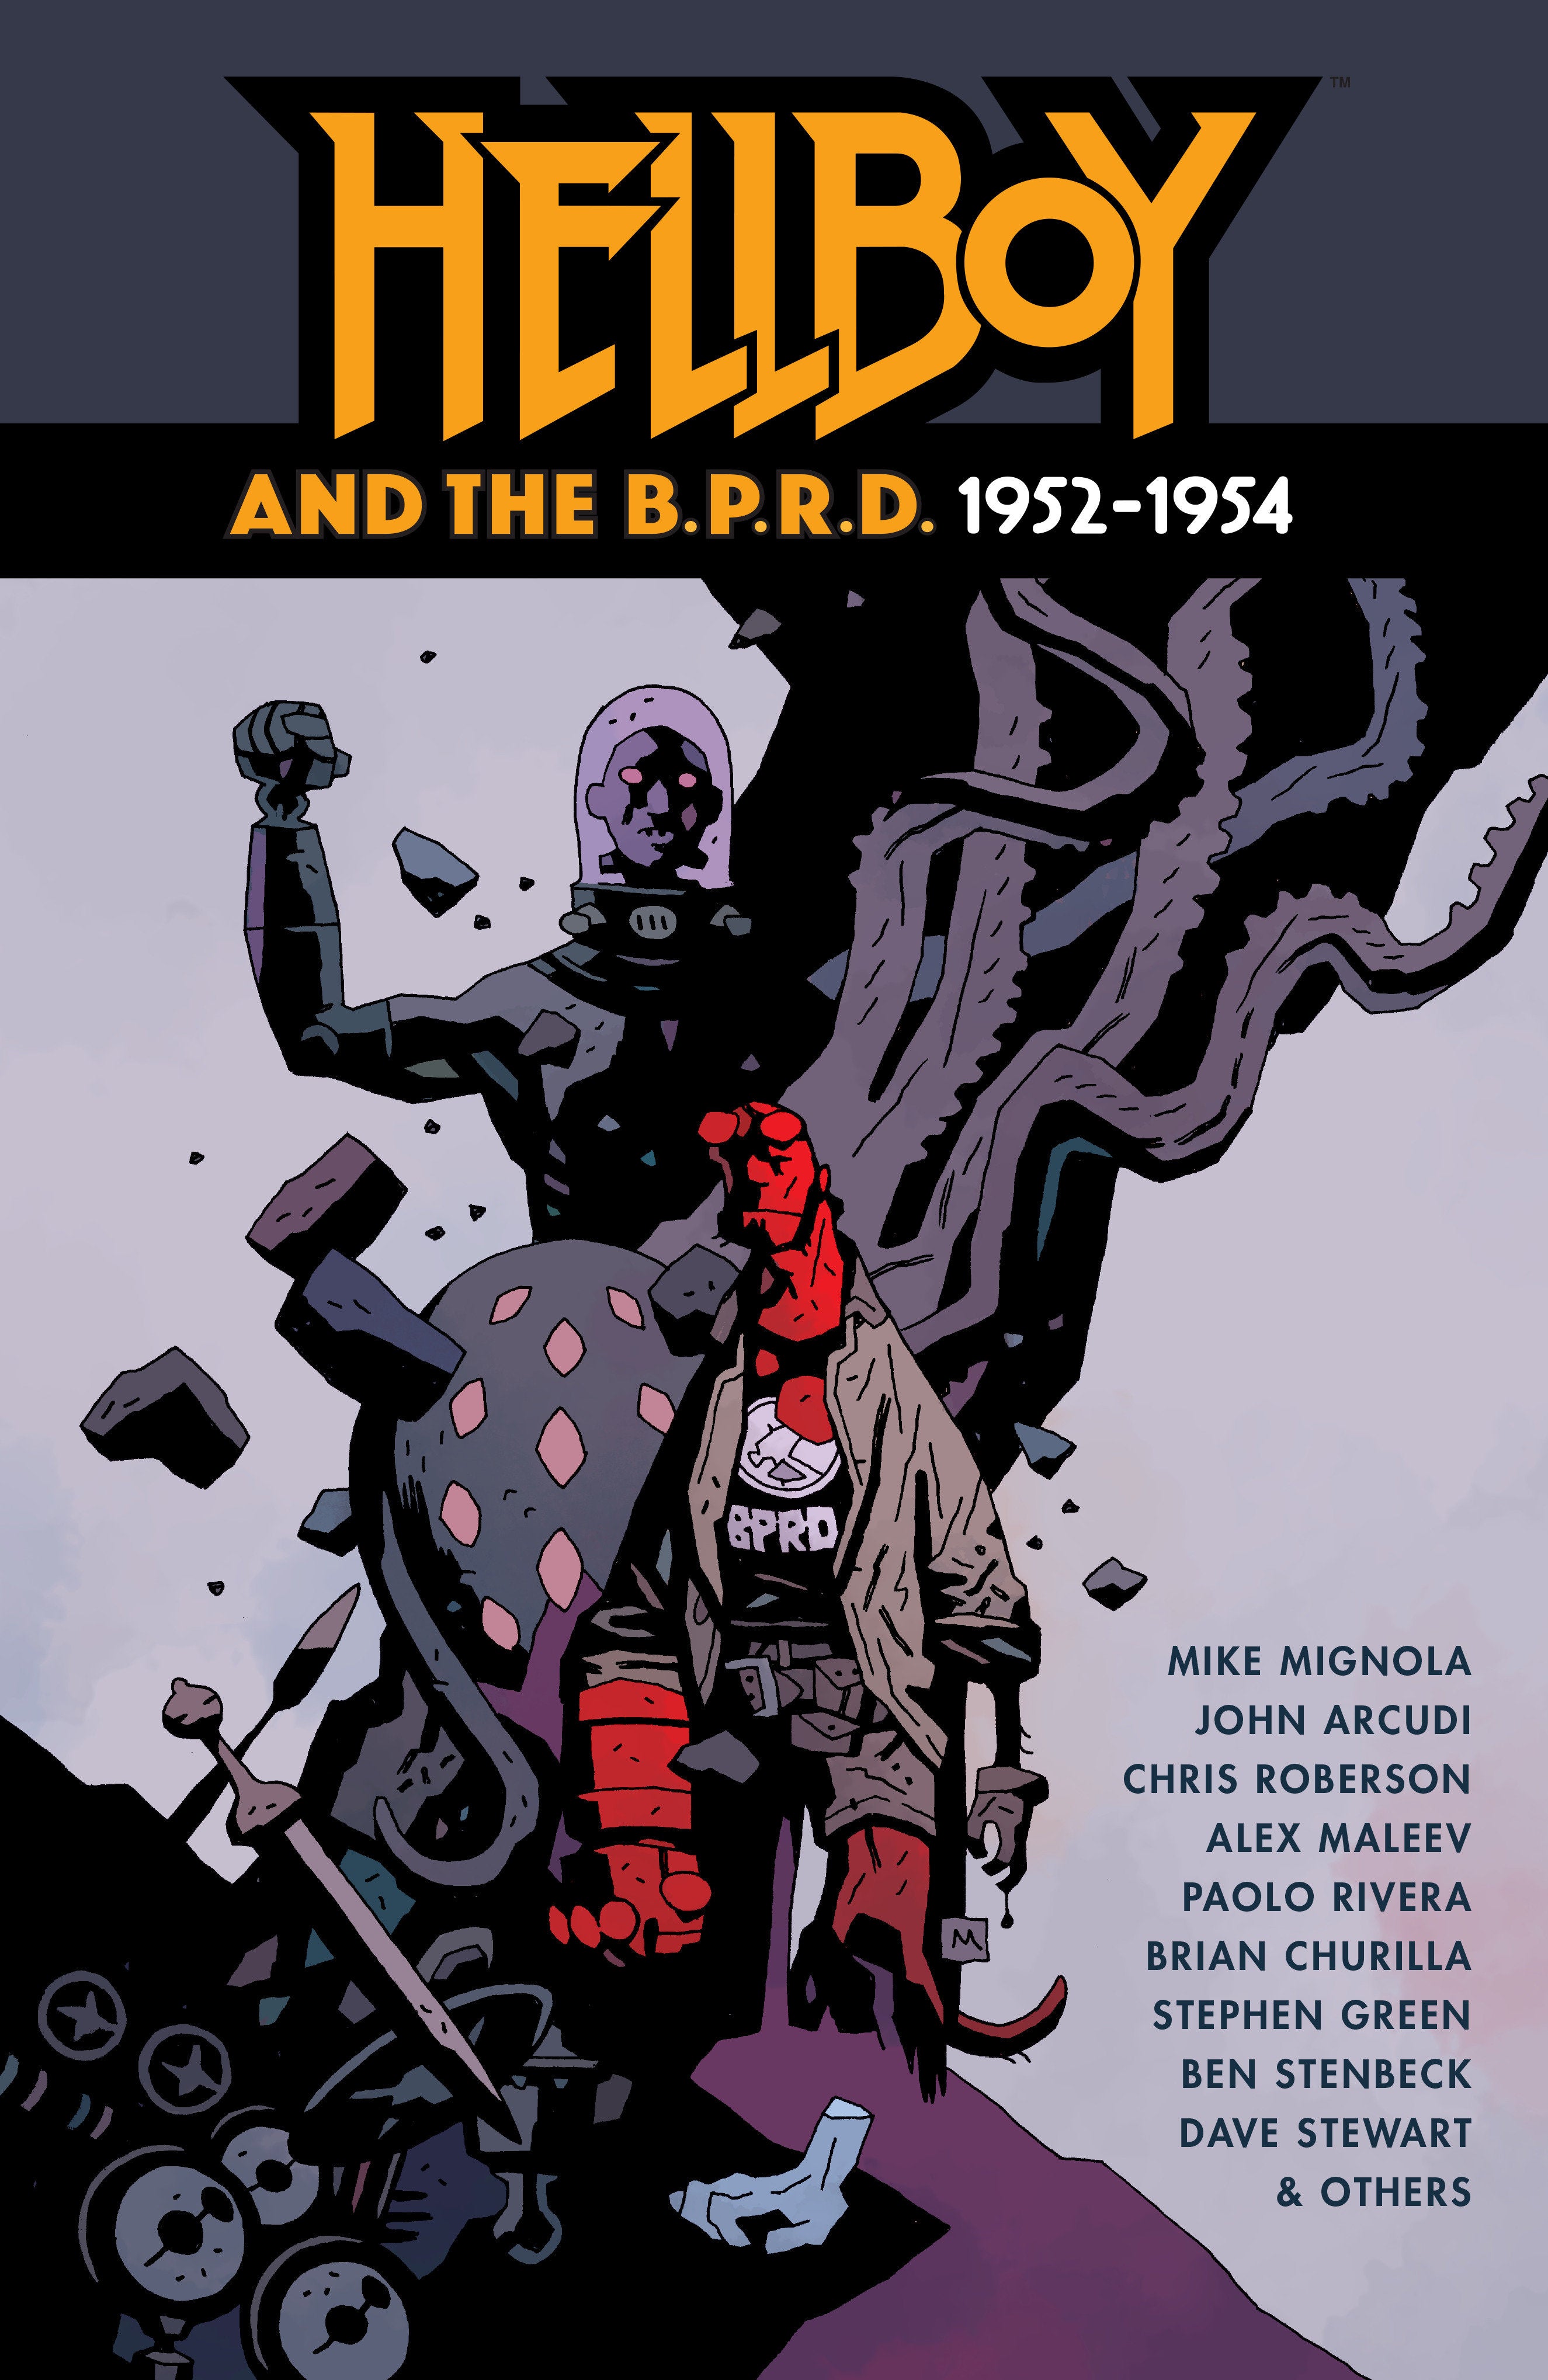 Hellboy And The B.P.R.D.: 1952-1954 | BD Cosmos